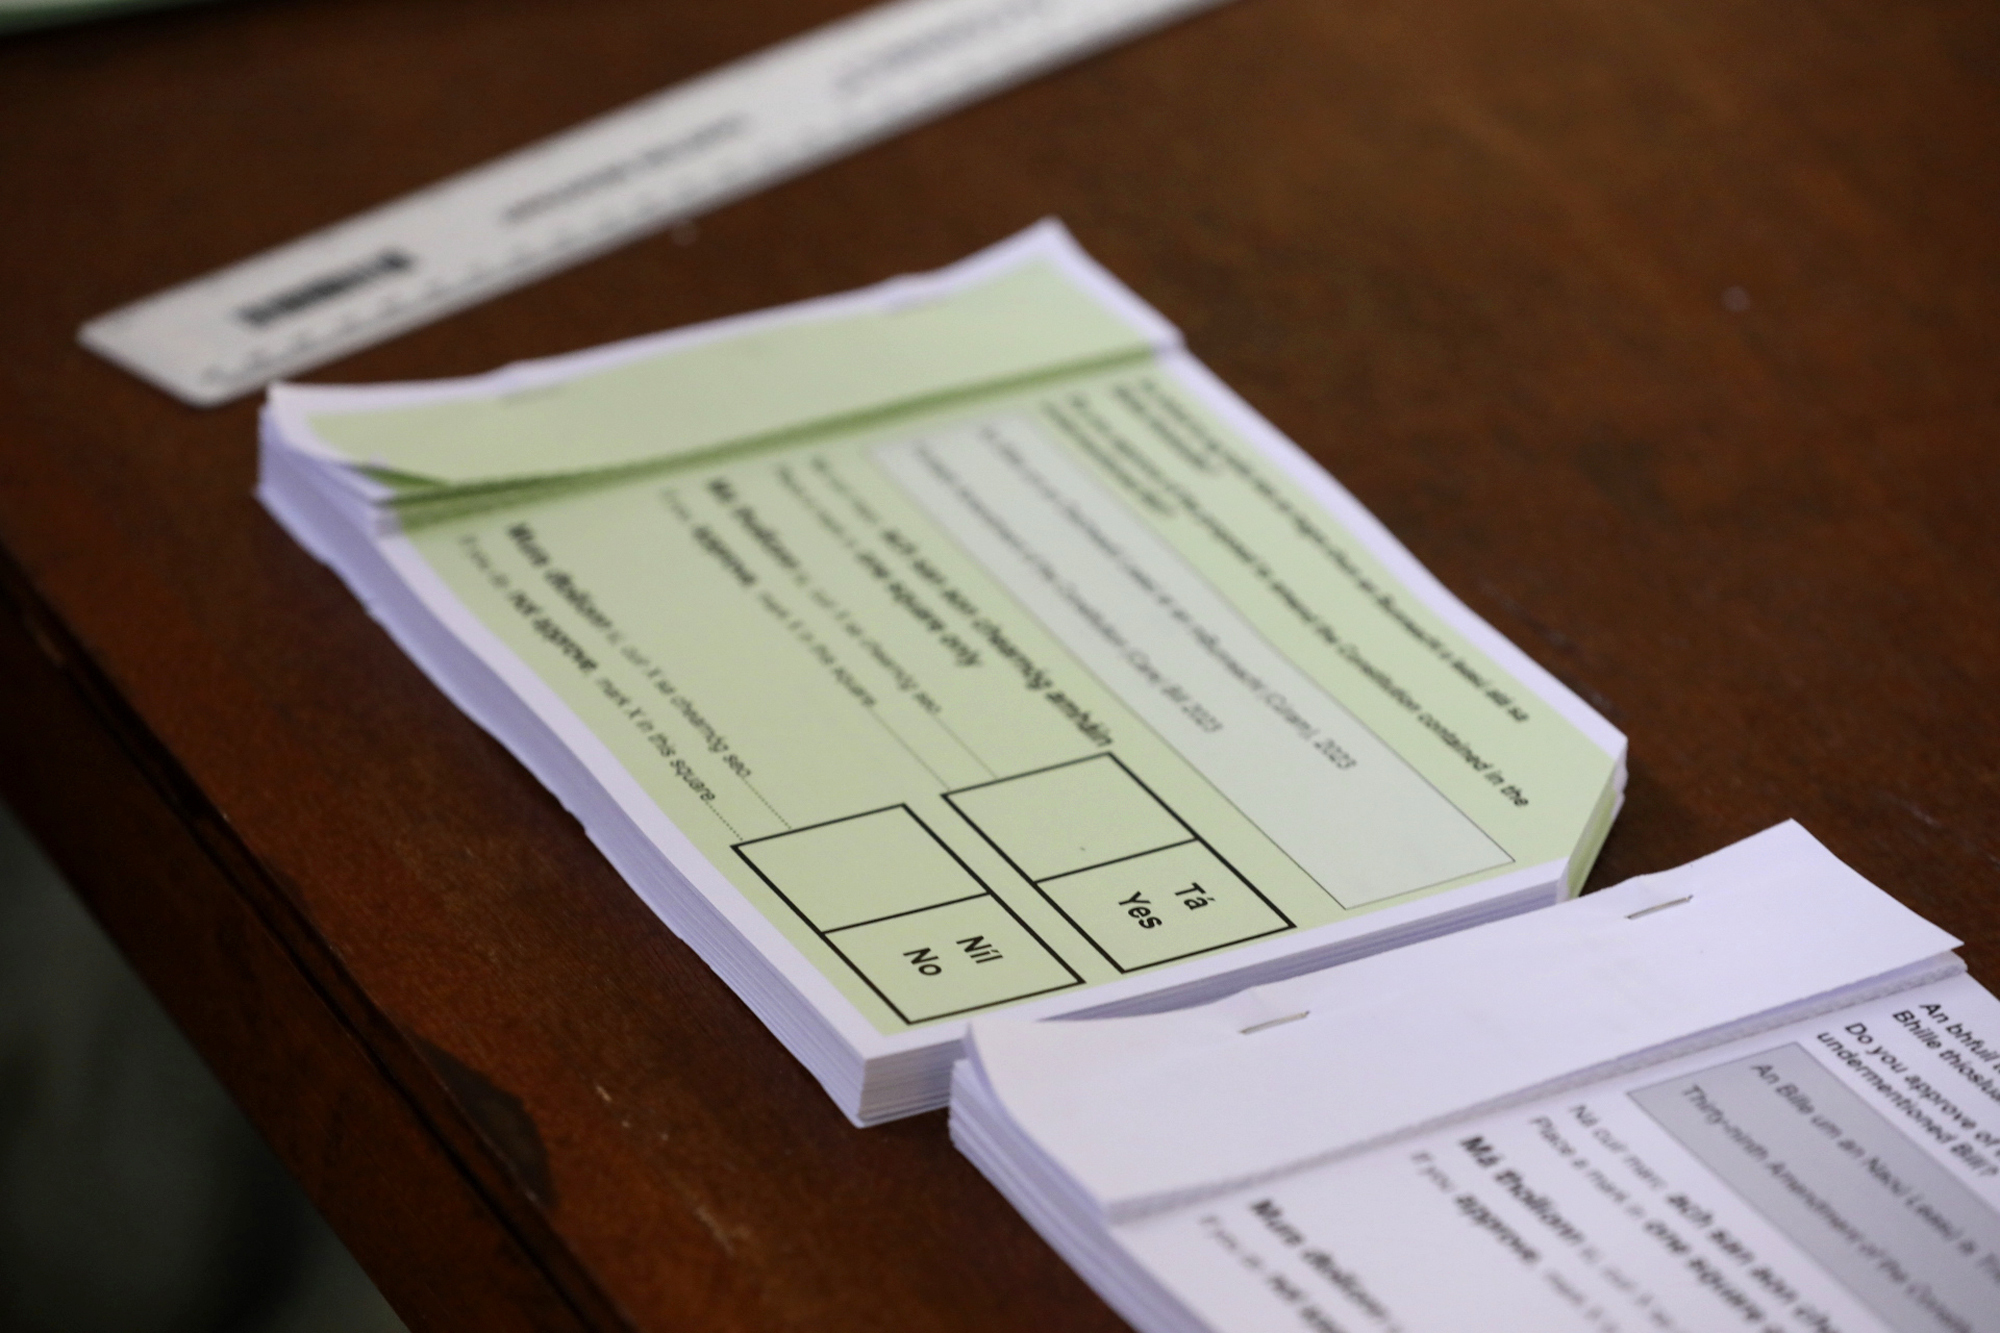 Unmarked voting forms in two languages, English and Irish, for a referendum on the proposed changes to the wording of the Constitution relating to the areas of family and care are seen at Old St Joseph's Gym Hall, in Dublin, Ireland, Friday, March 8, 2024. As the world marks International Women's Day, in Ireland, voters are deciding on Friday whether to change the constitution to remove passages referring to women’s domestic duties and broadening the definition of the family. (Gareth Chaney/PA via AP)